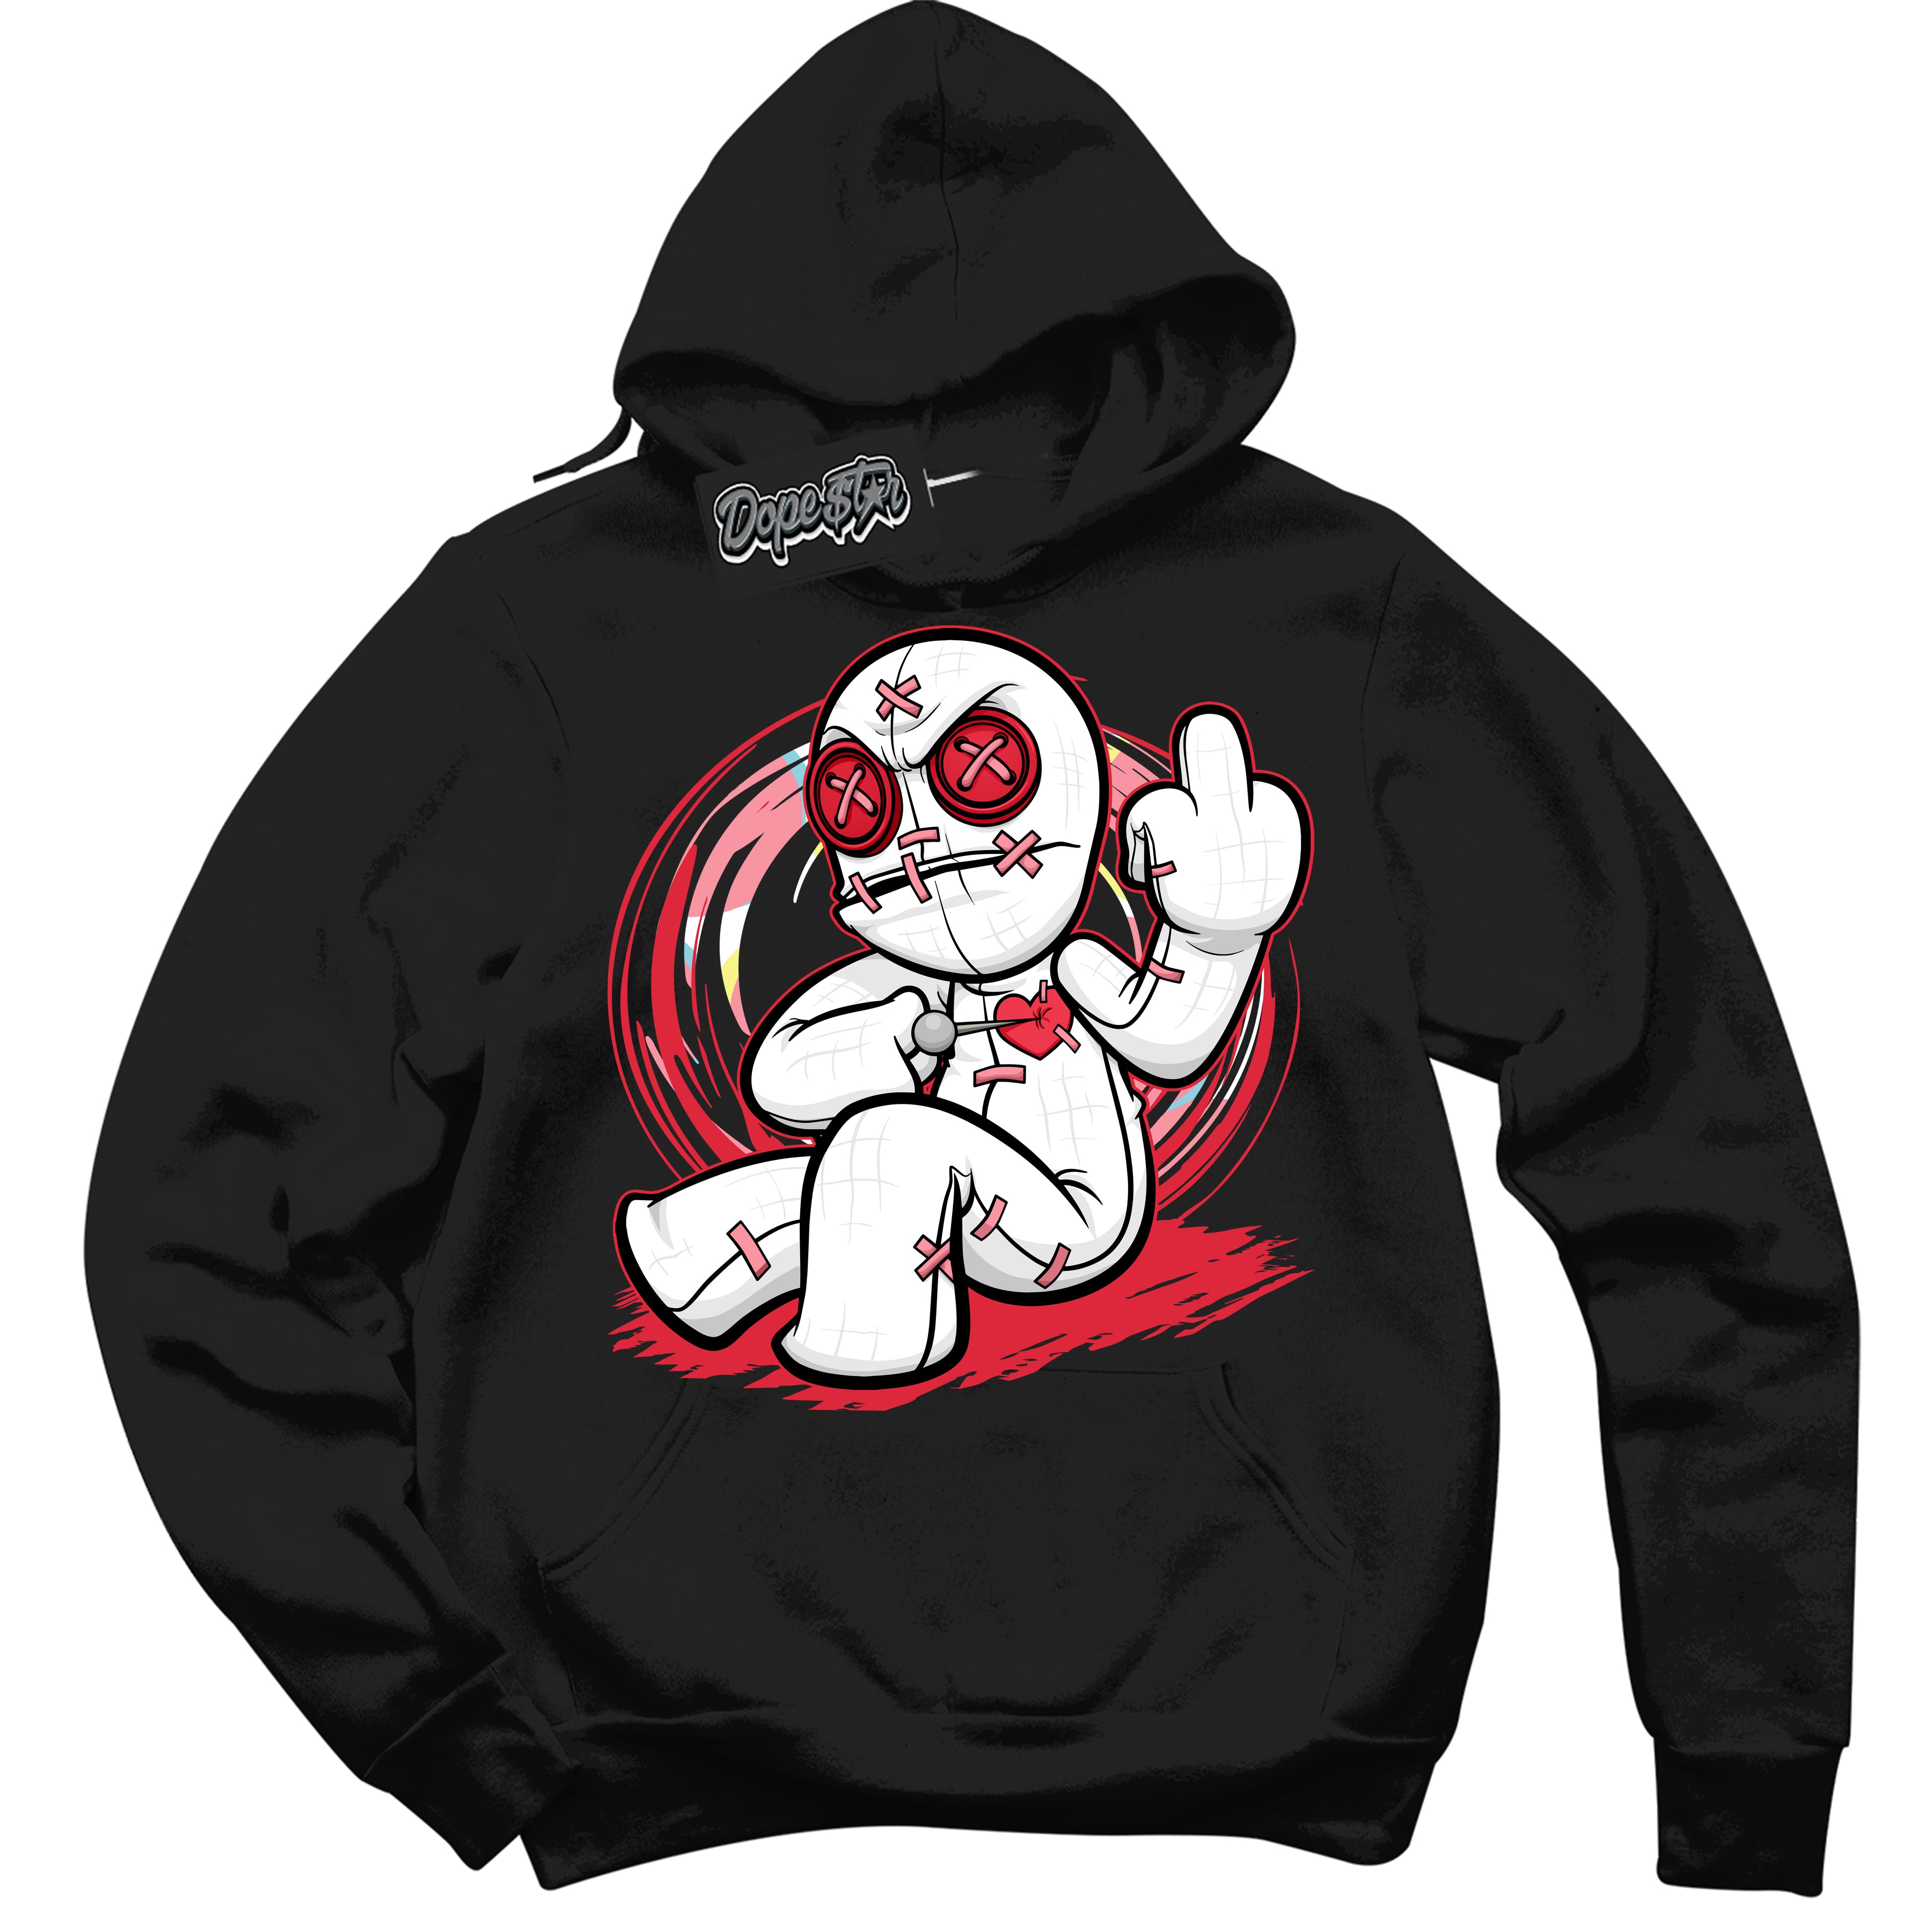 Cool Black Graphic DopeStar Hoodie with “ VooDoo Doll “ print, that perfectly matches Spider-Verse 1s sneakers